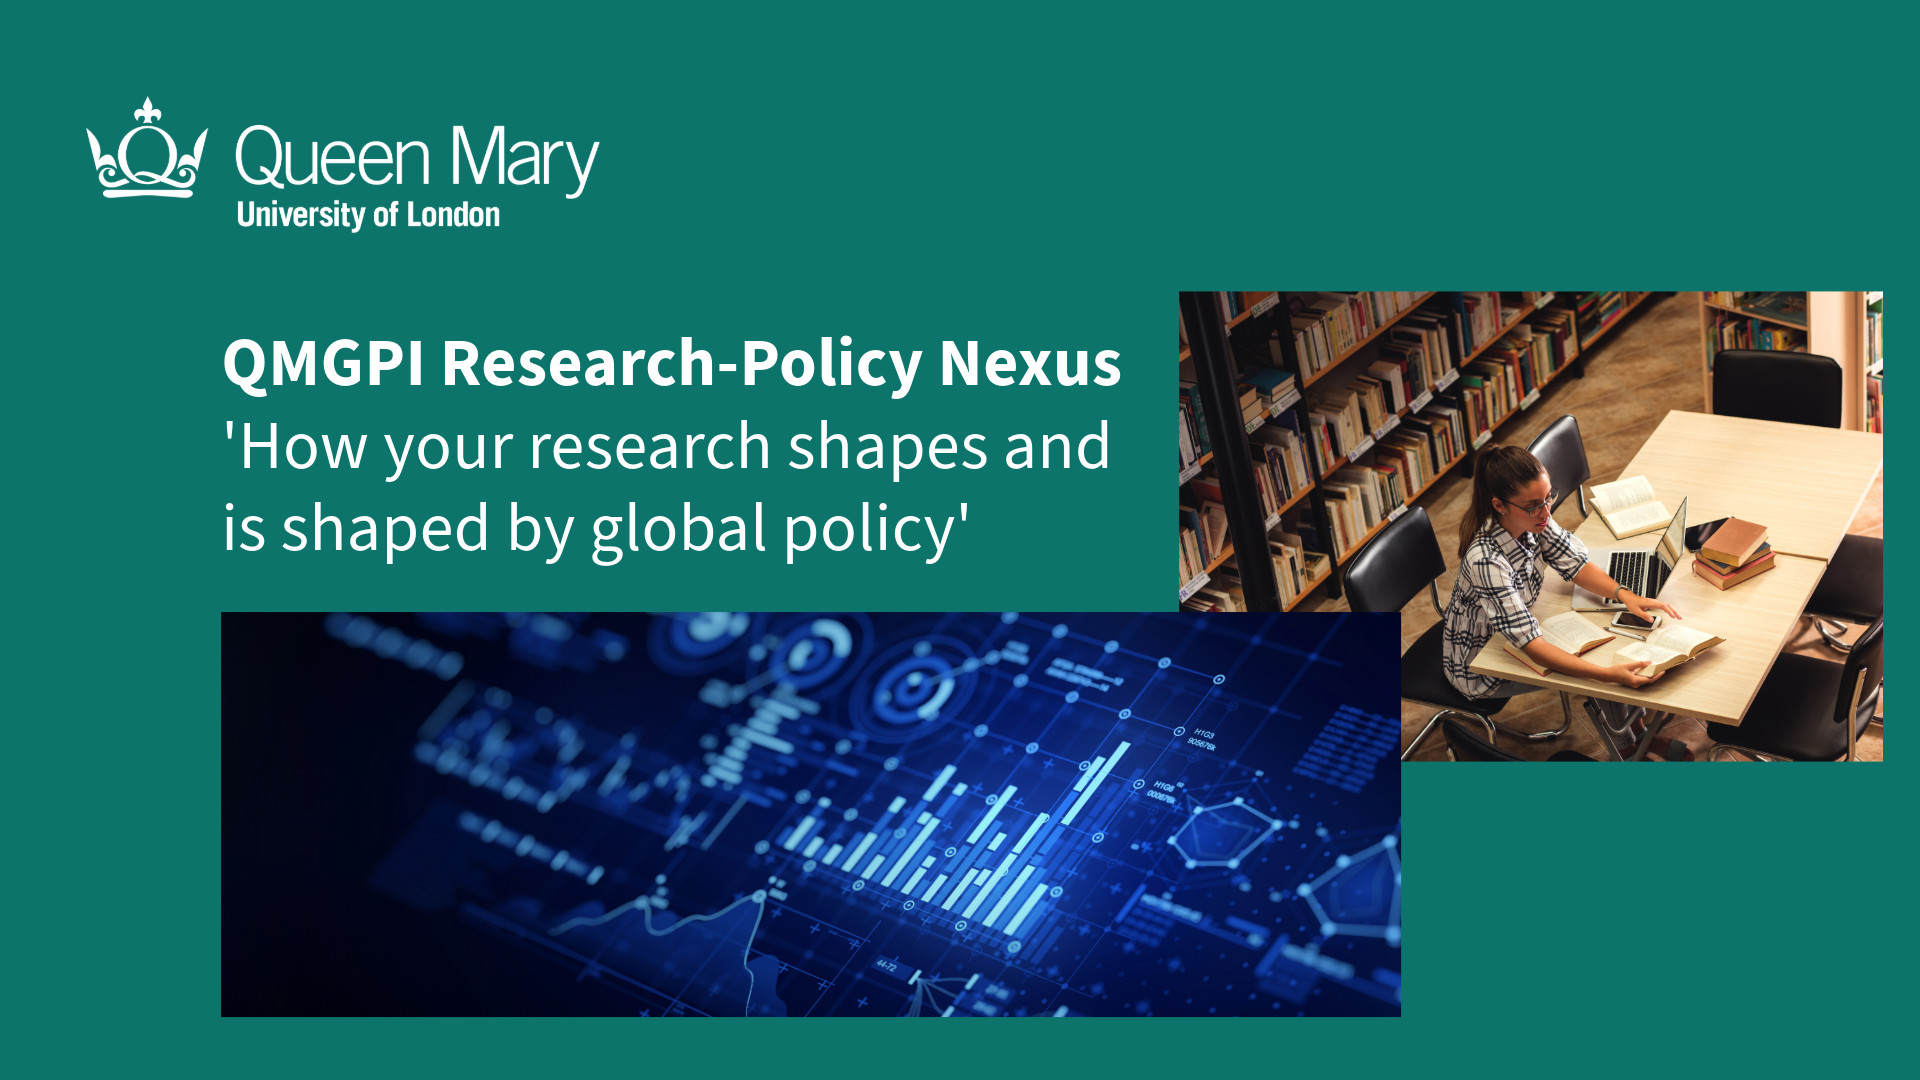 Join us at the QMGPI Research-Policy Nexus